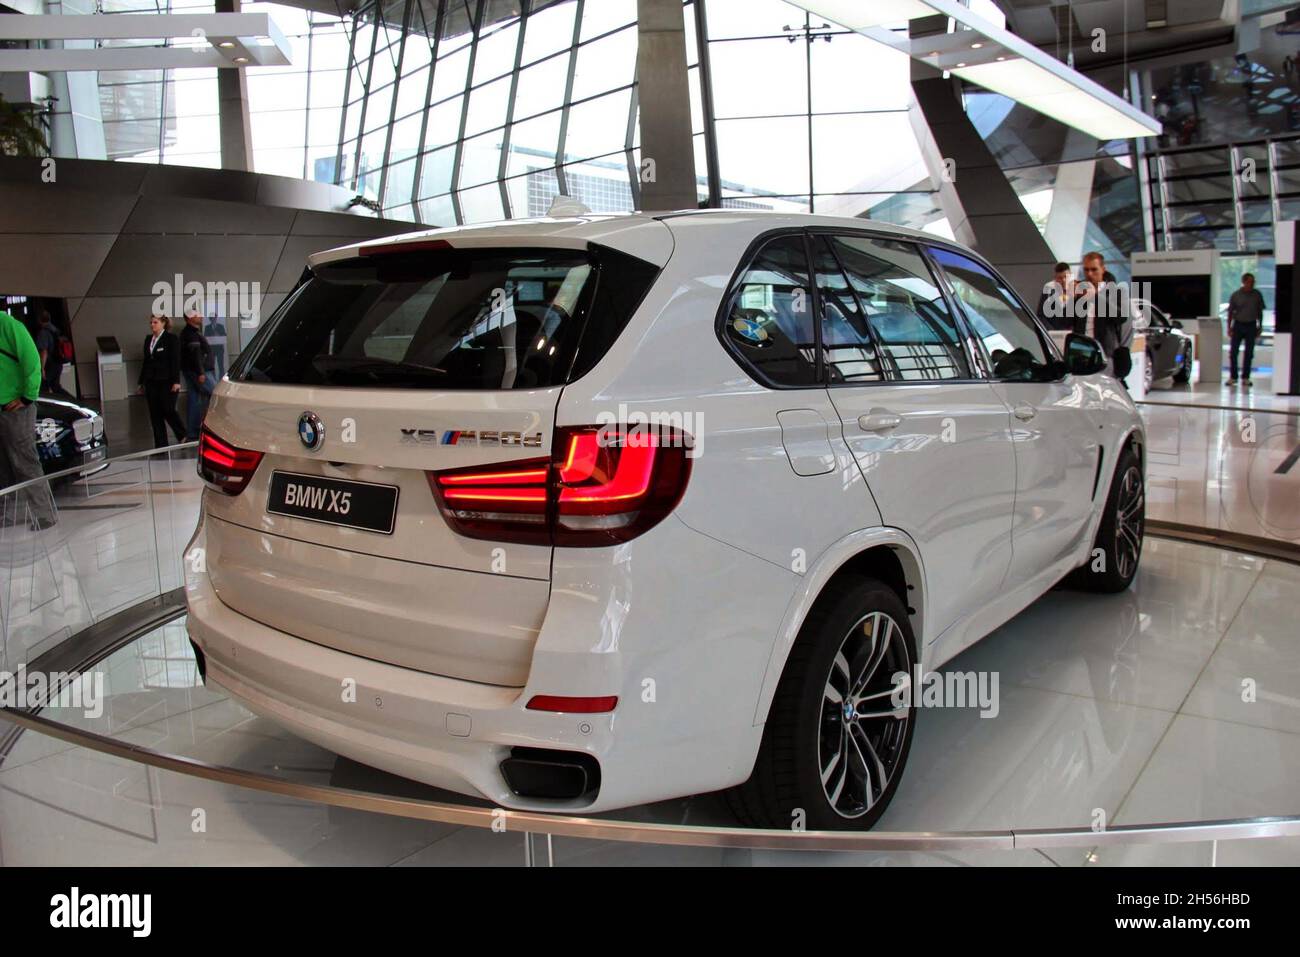 BMW X5, M50D version, white color. Launched at the 2013 Frankfurt International Motor Show. BMW Museum: Welt - Munich - Germany . Stock Photo